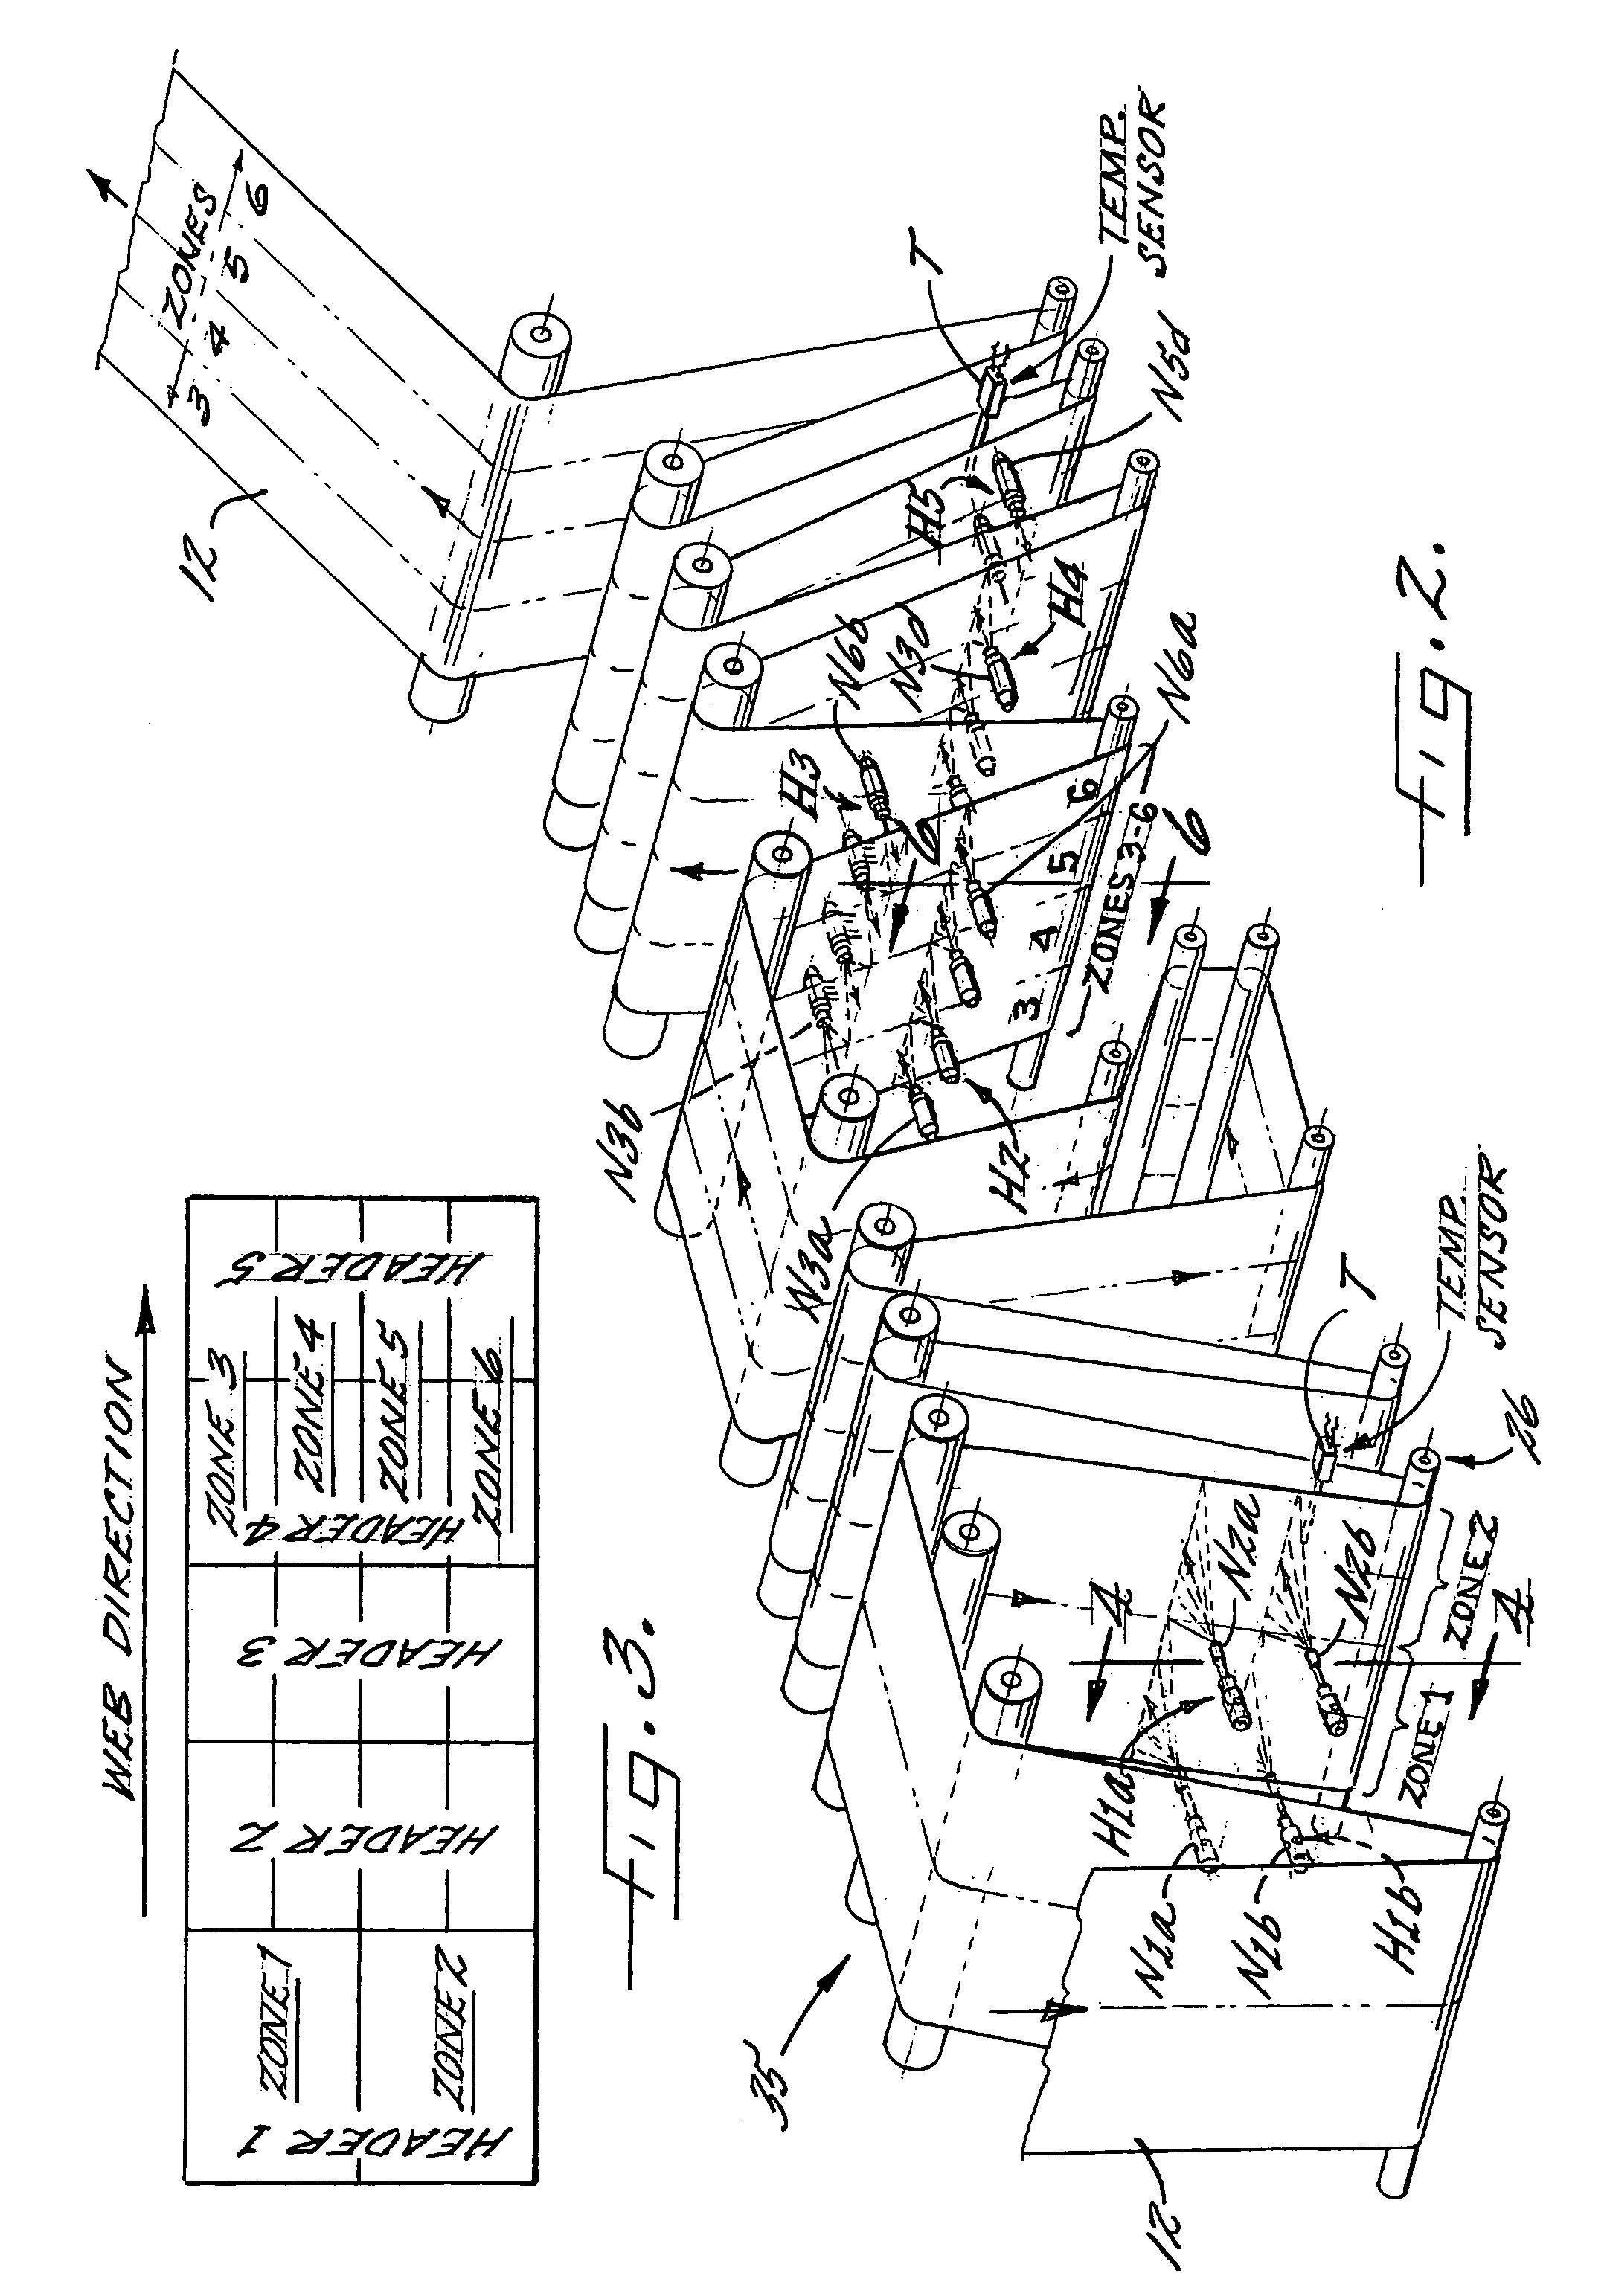 Apparatus and method for processing sheet materials